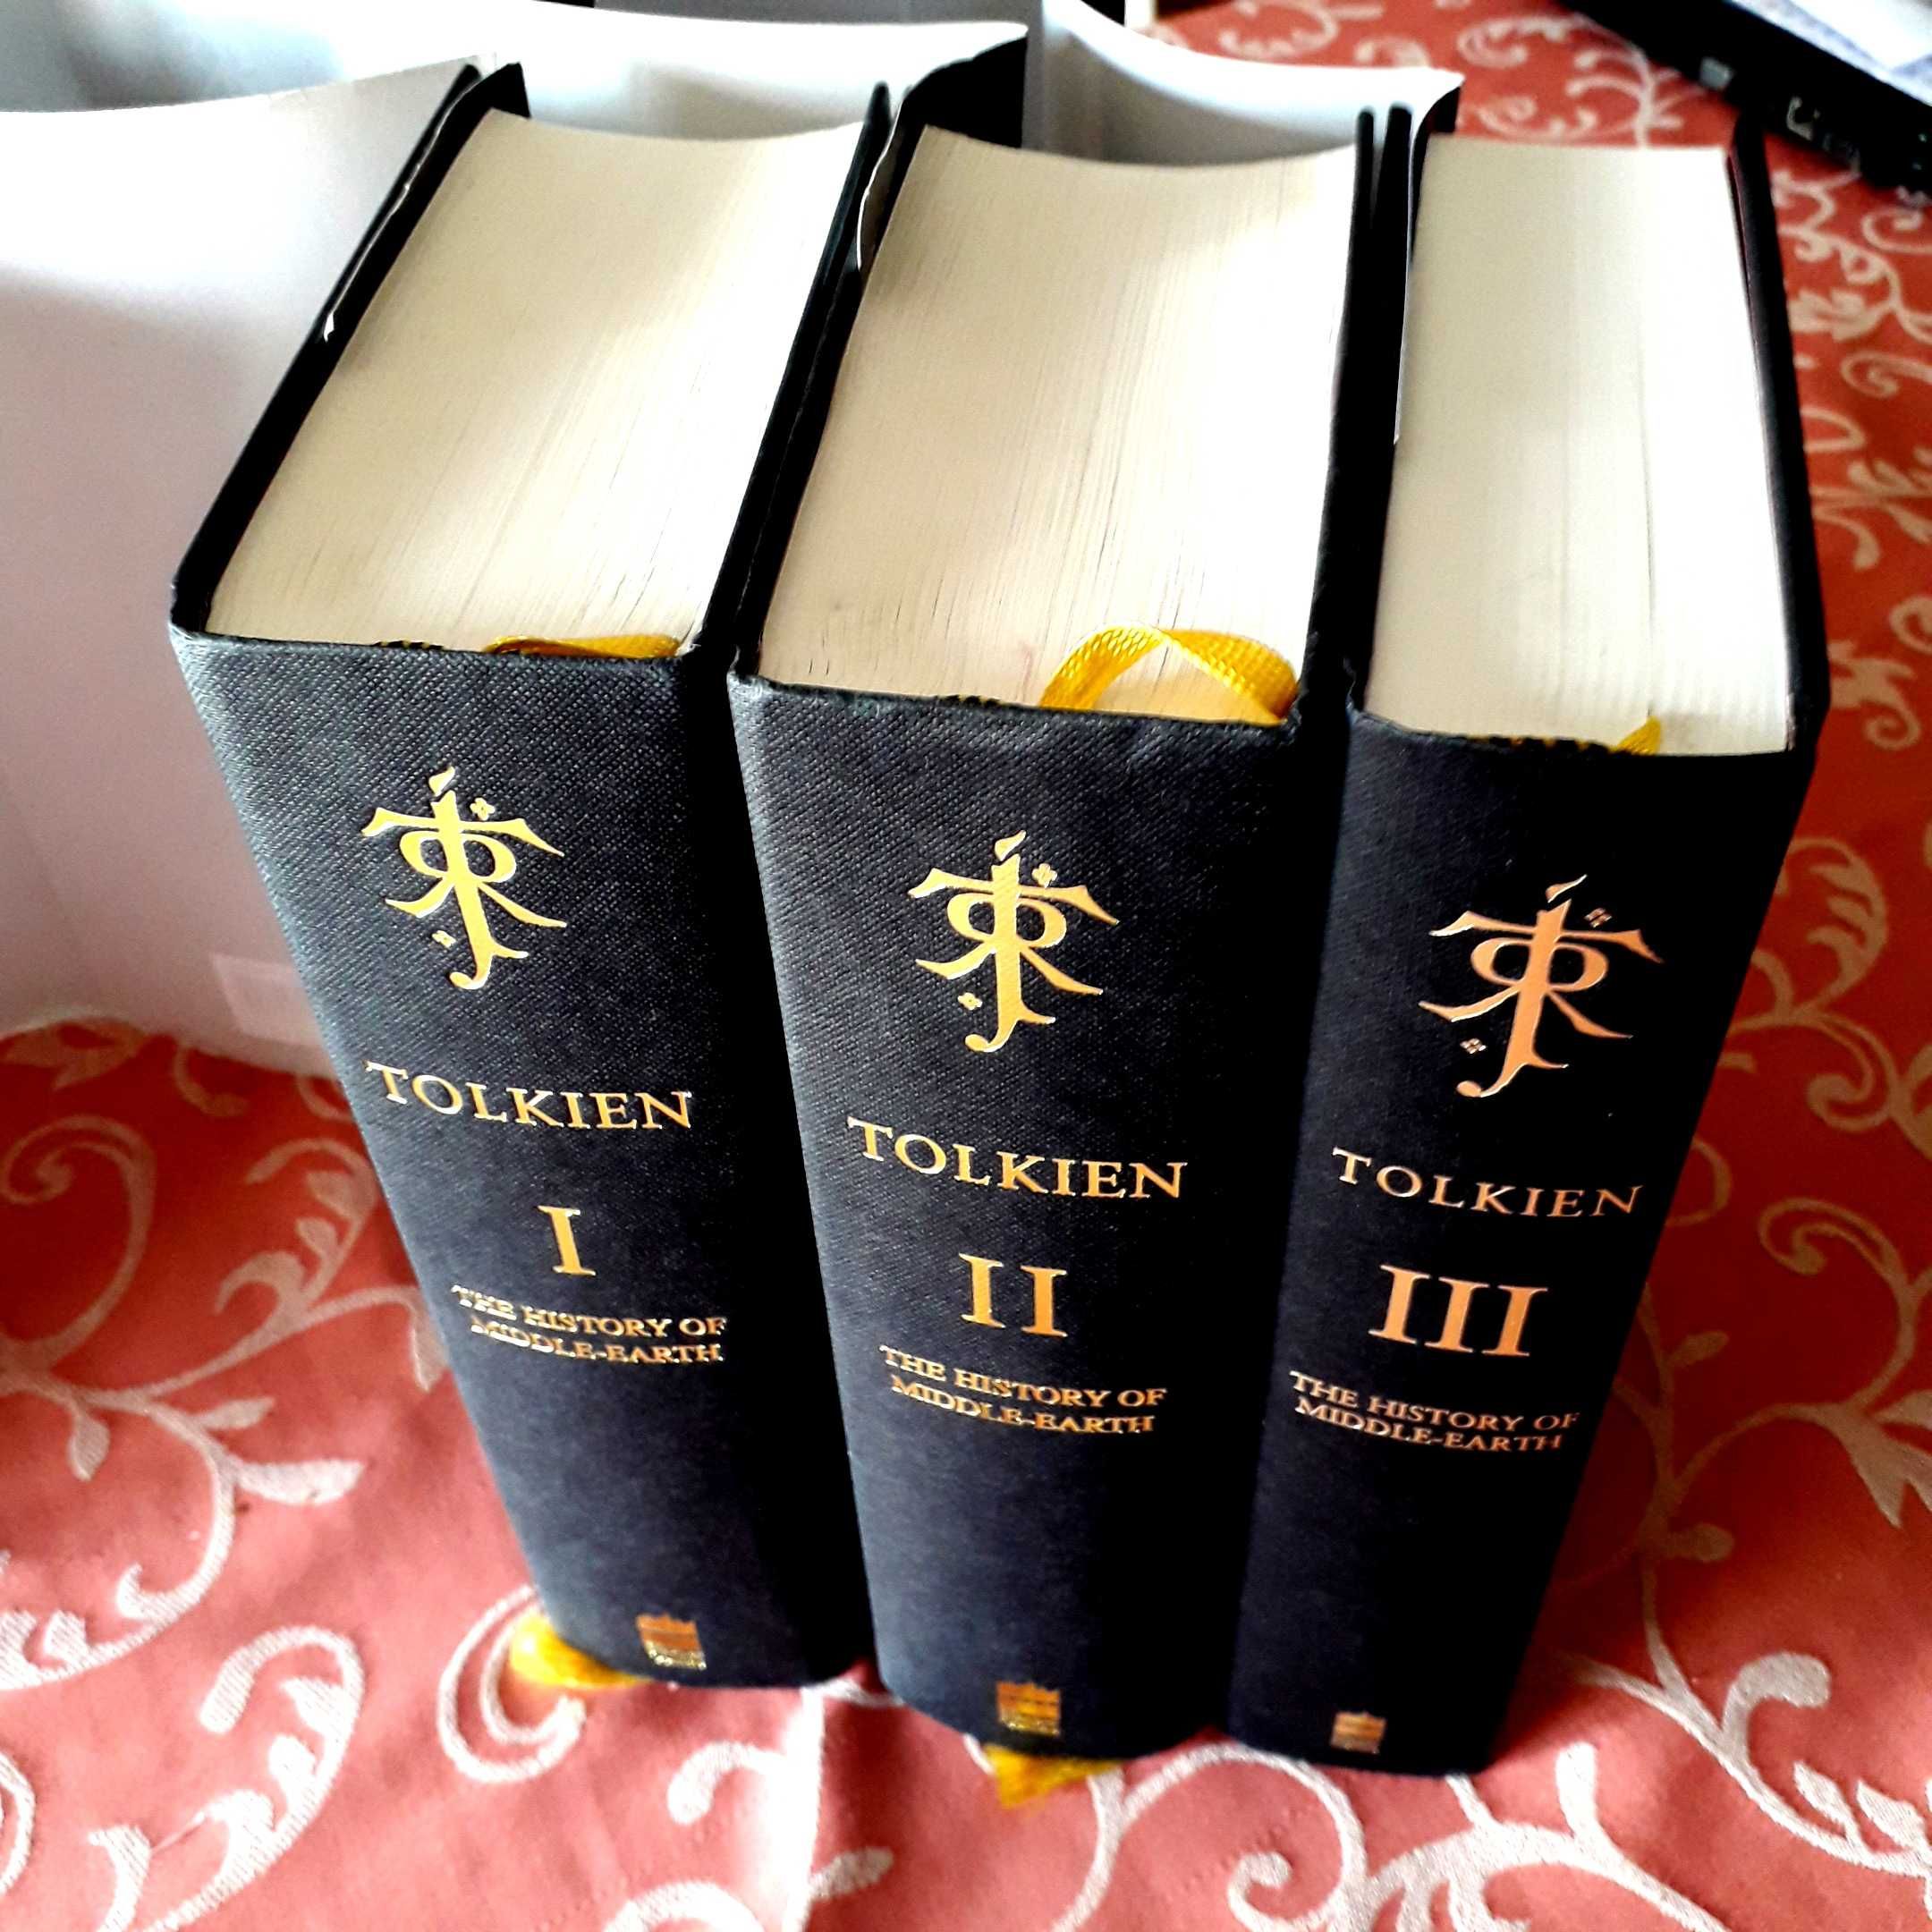 J R R Tolkien - History of the Middle-earth (HarperCollins HB 2002)